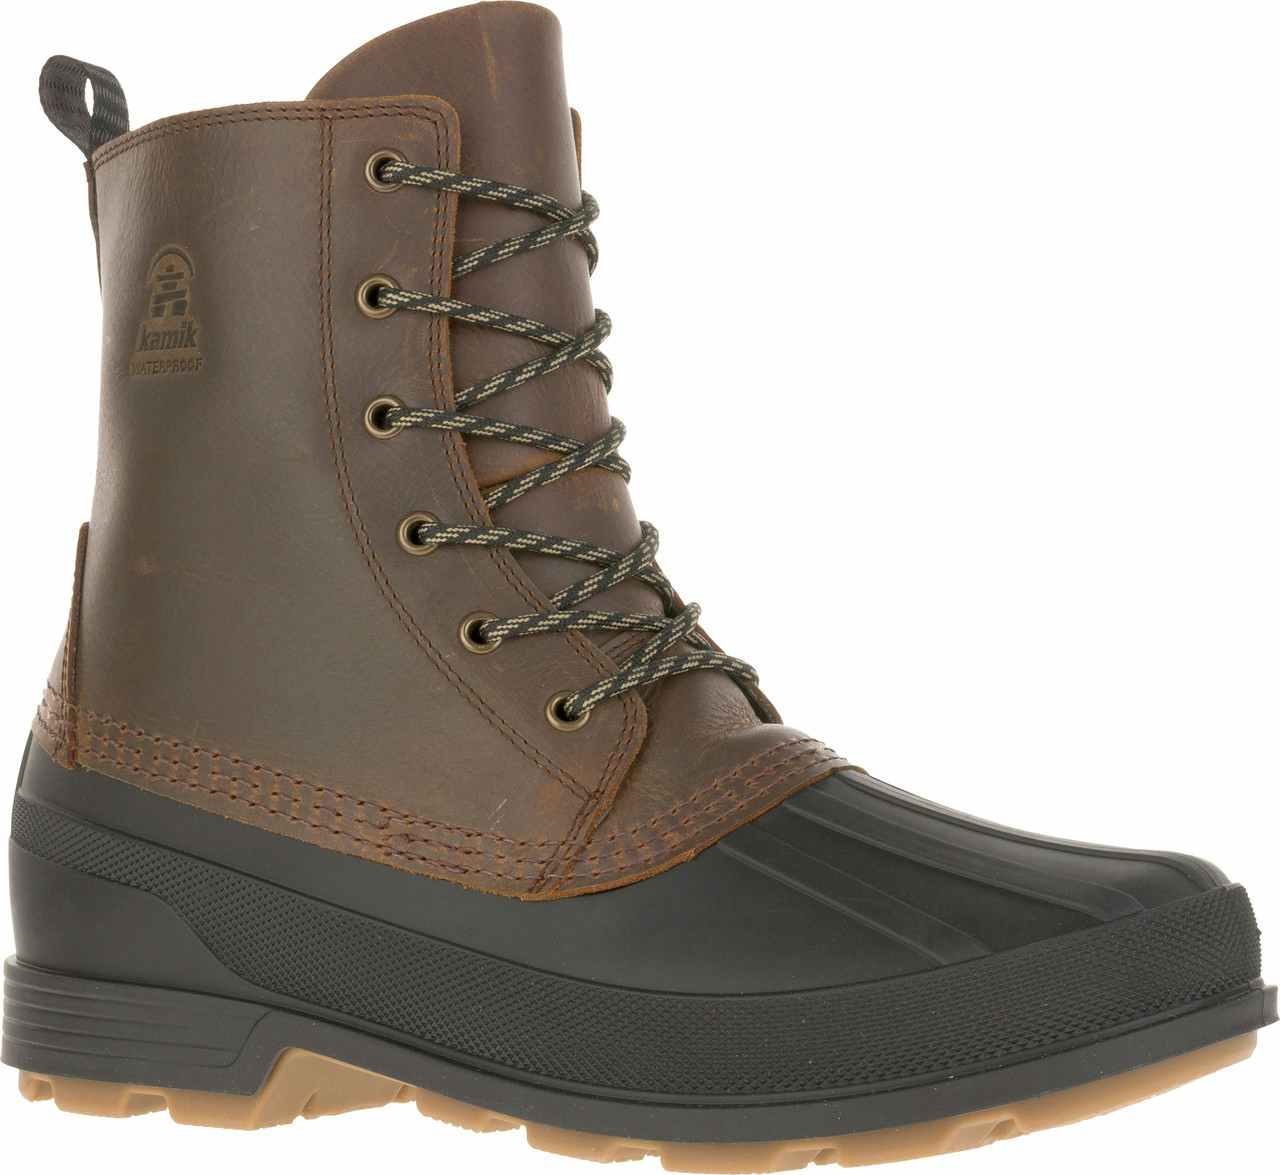 Lawrence Leather Waterproof Insulated  Boots Chocolate